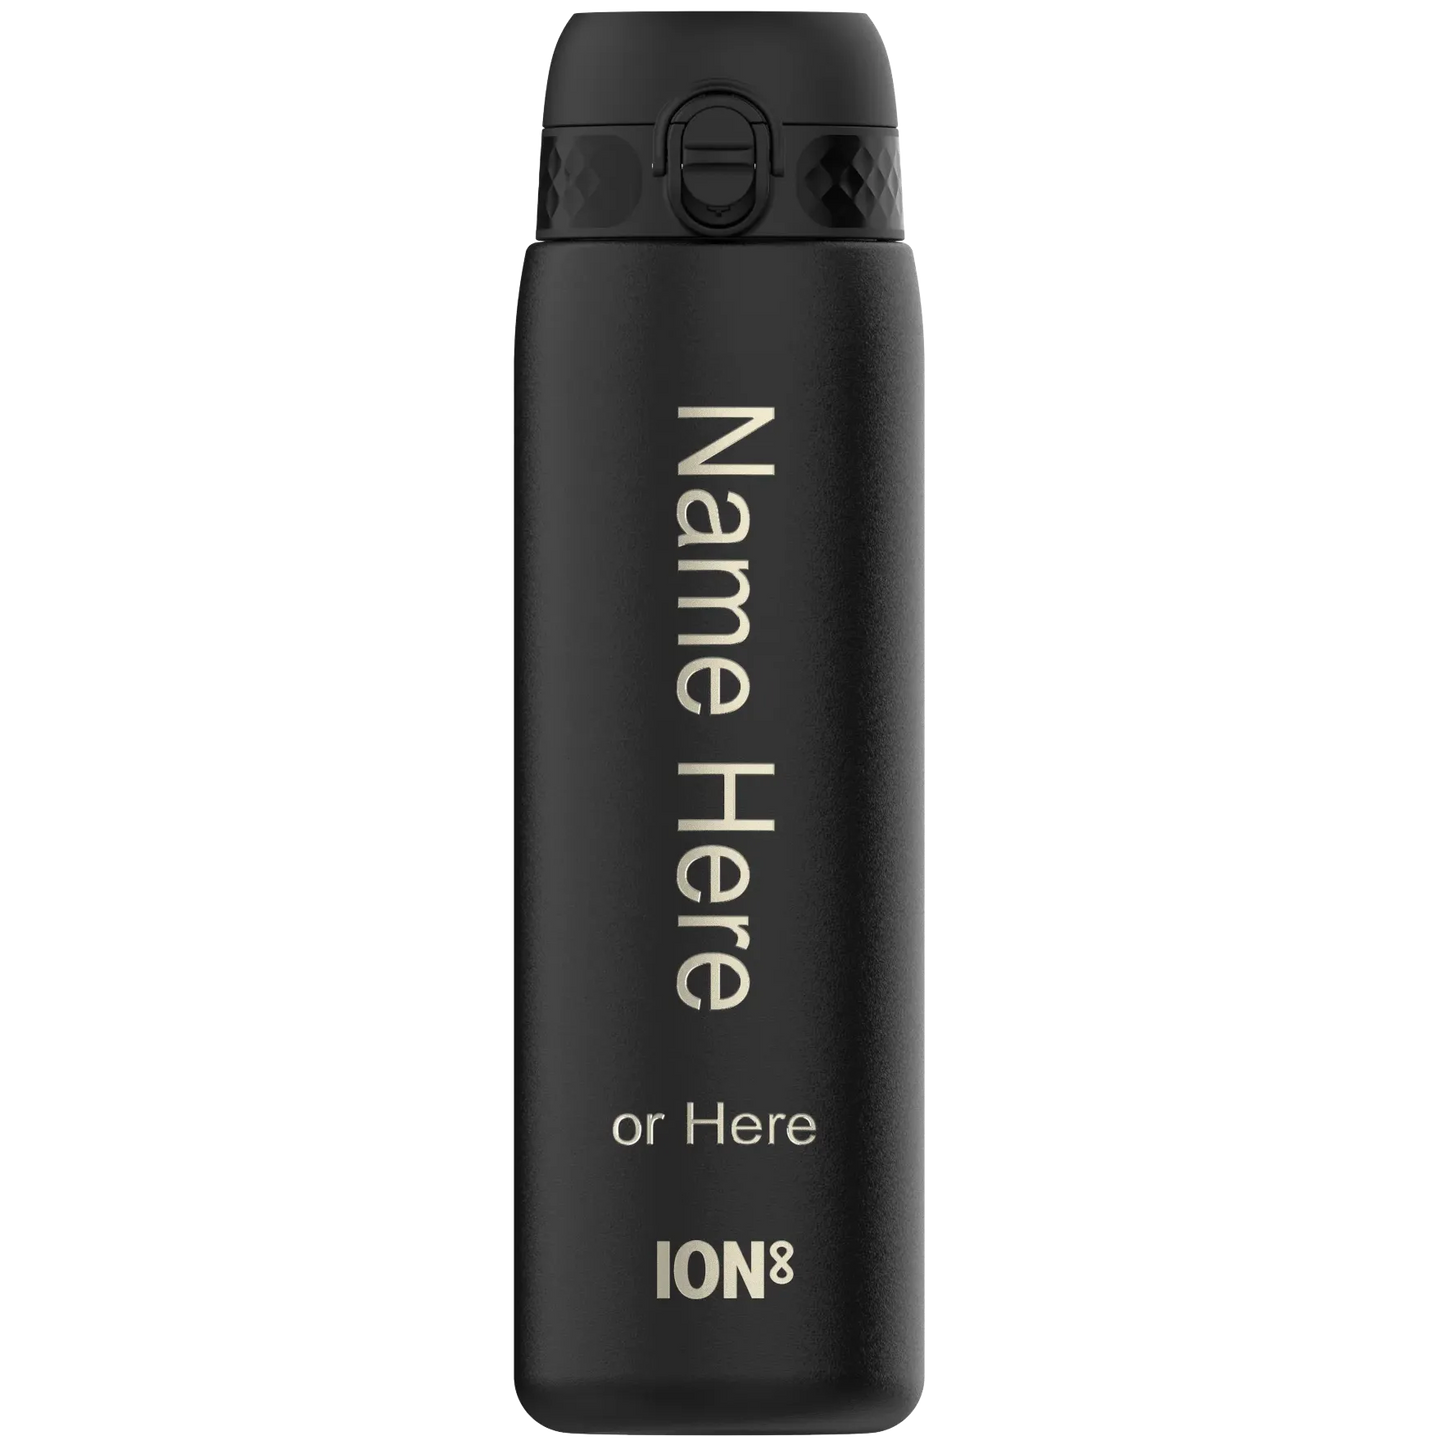 Insulated Water Bottles - Leak Proof 1 Litre Thermal Steel Water Bottle, Personalised, Vacuum Insulated, 1L